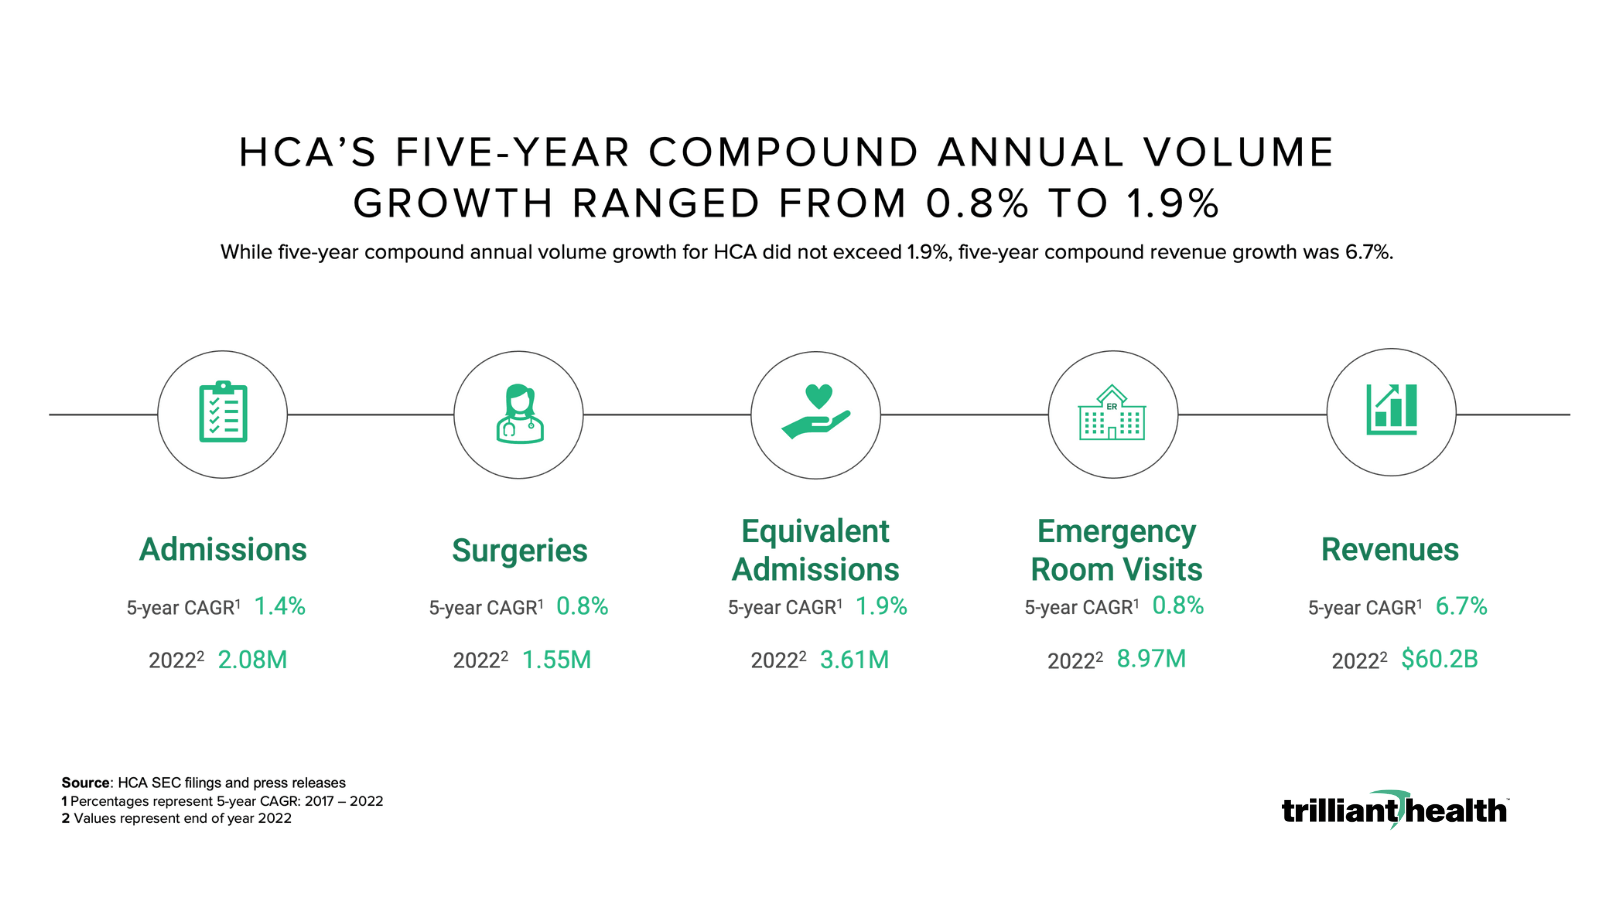 HCA's Five-Year Compound Annual Volume Growth Ranged from 0.8% to 1.9%